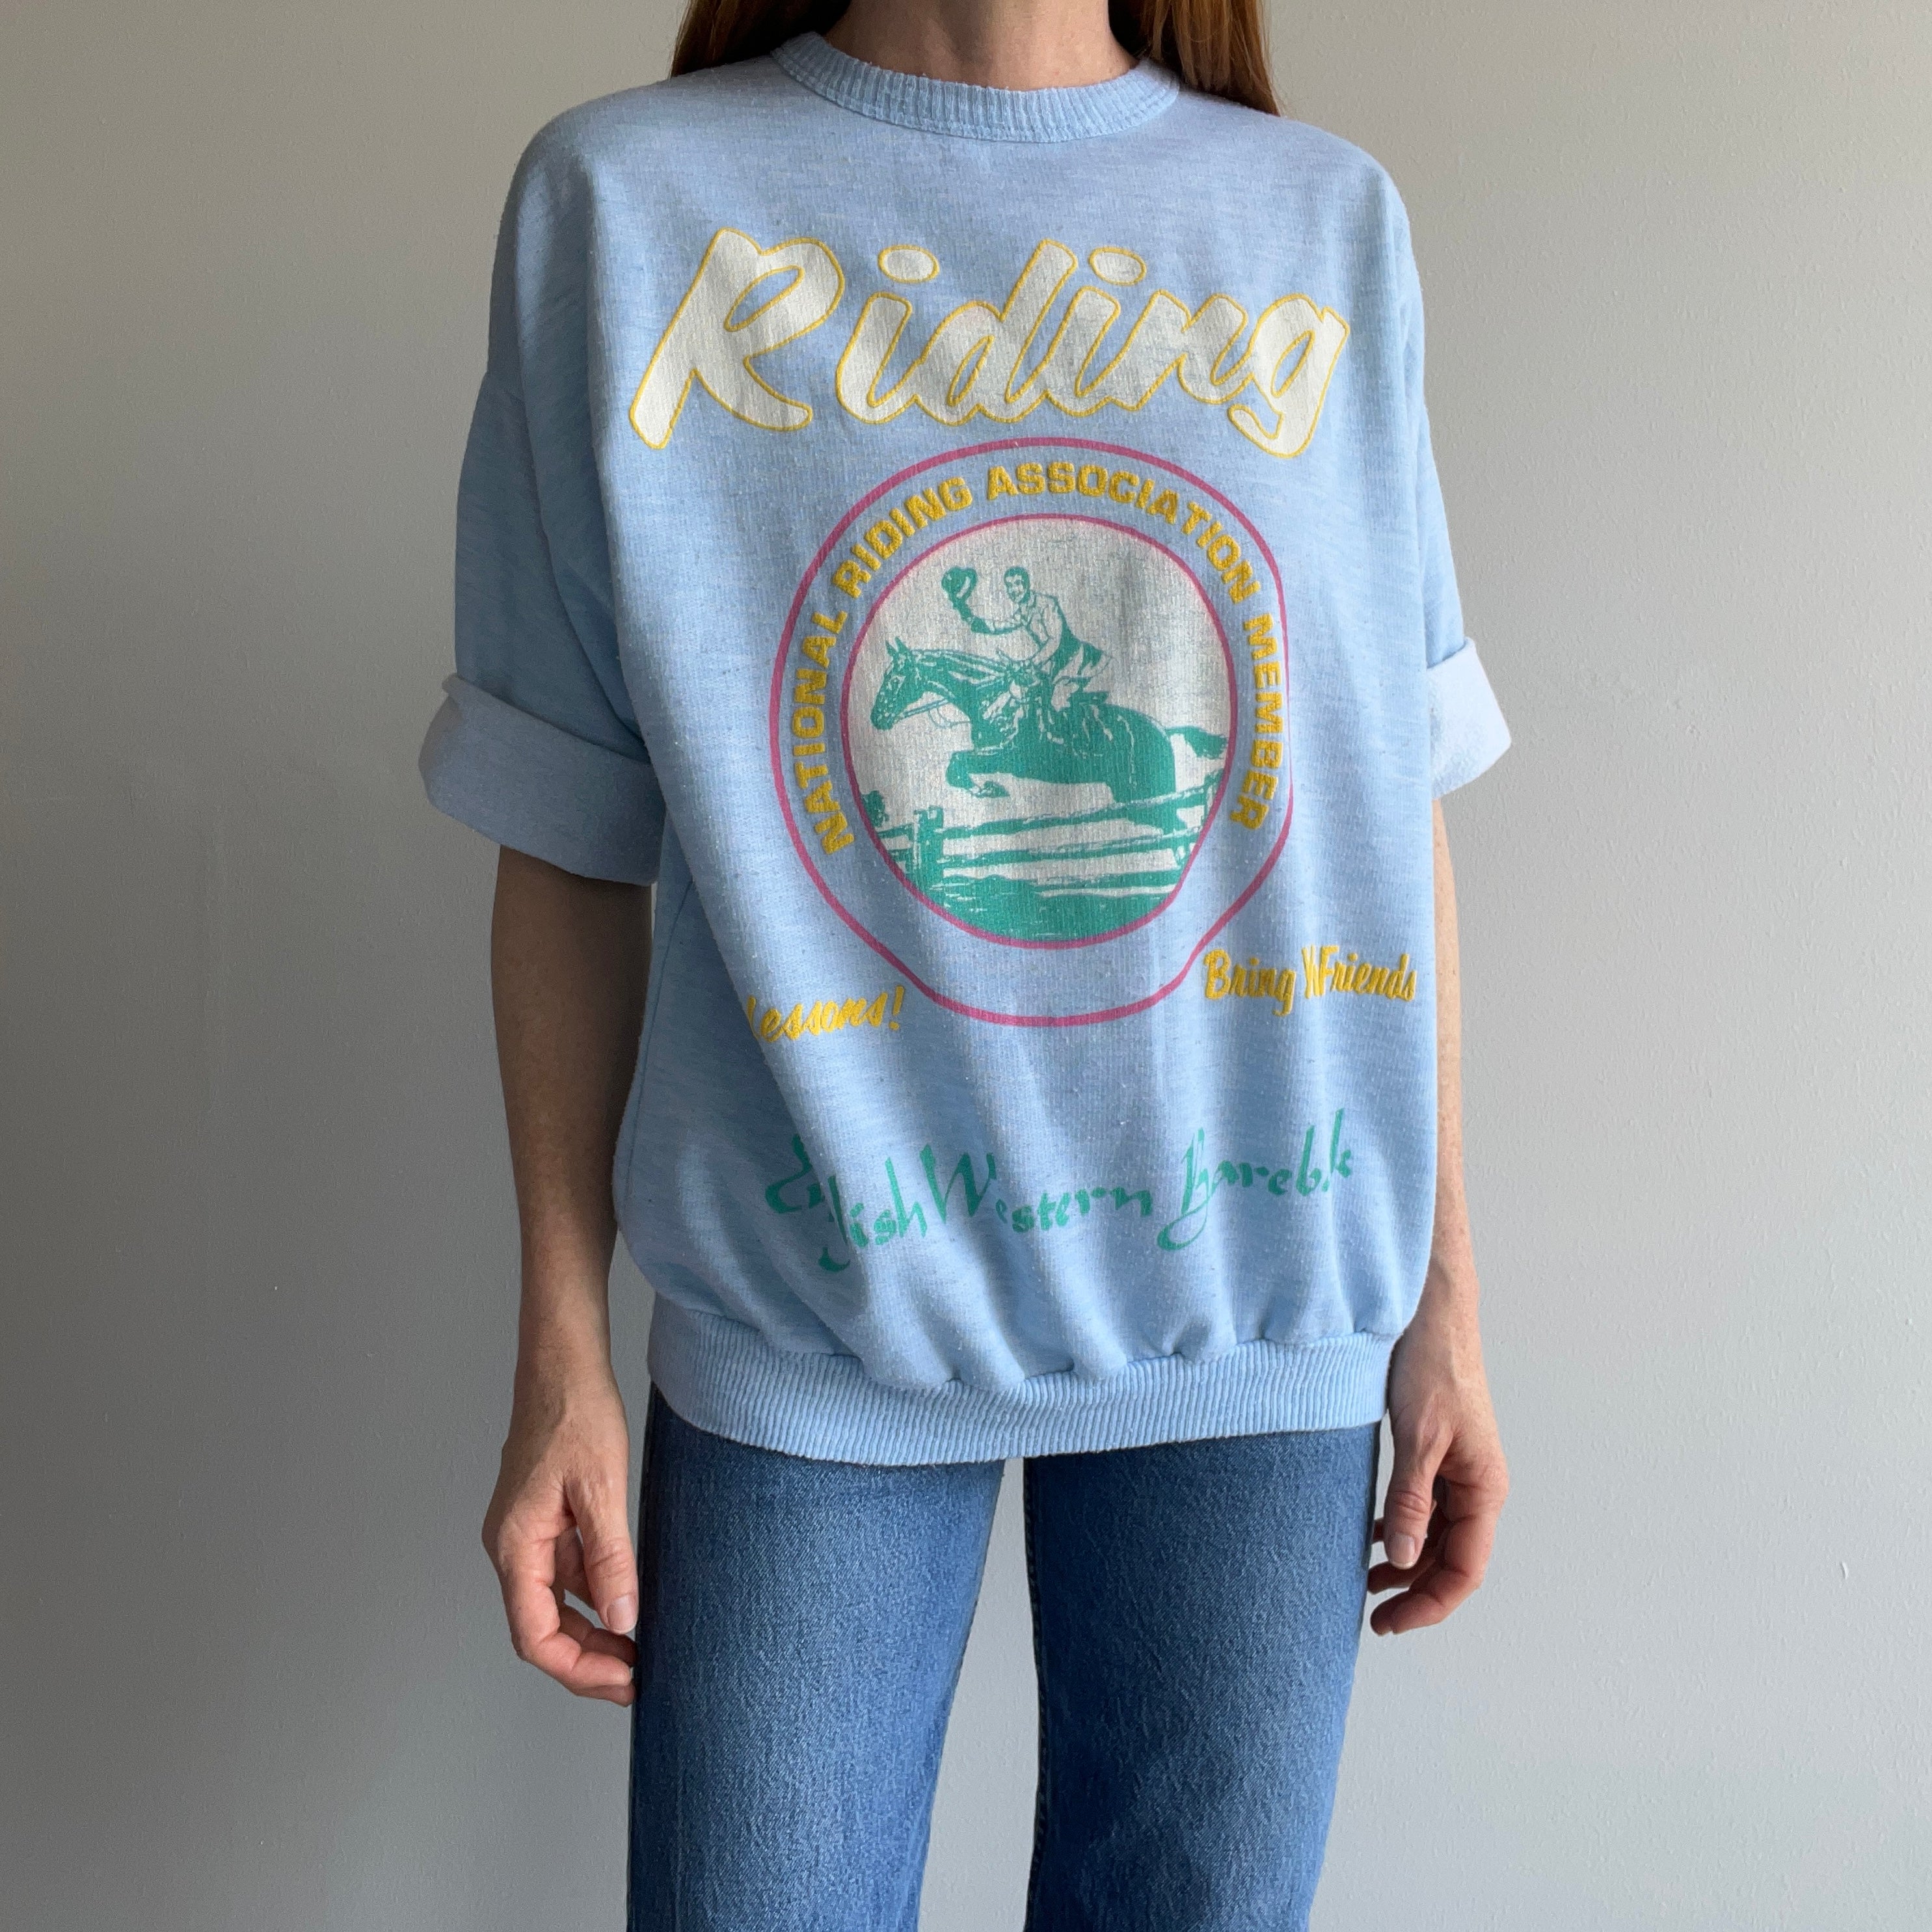 1980s Incredible Horsey Person English Riding Sweatshirt with Stains